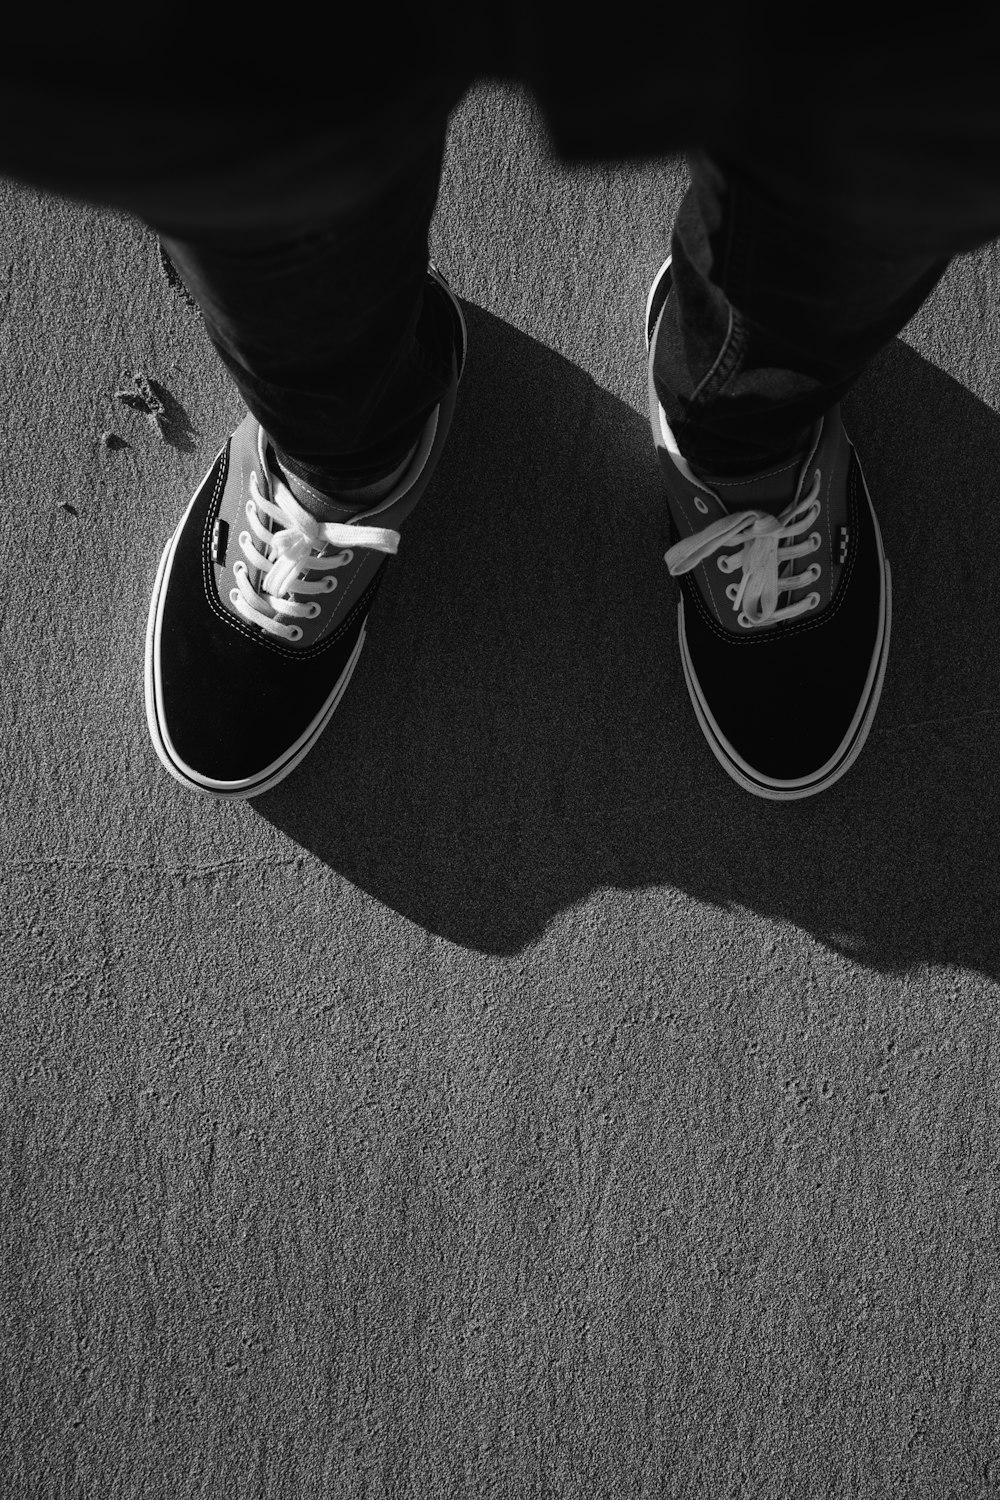 a black and white photo of a person's shoes